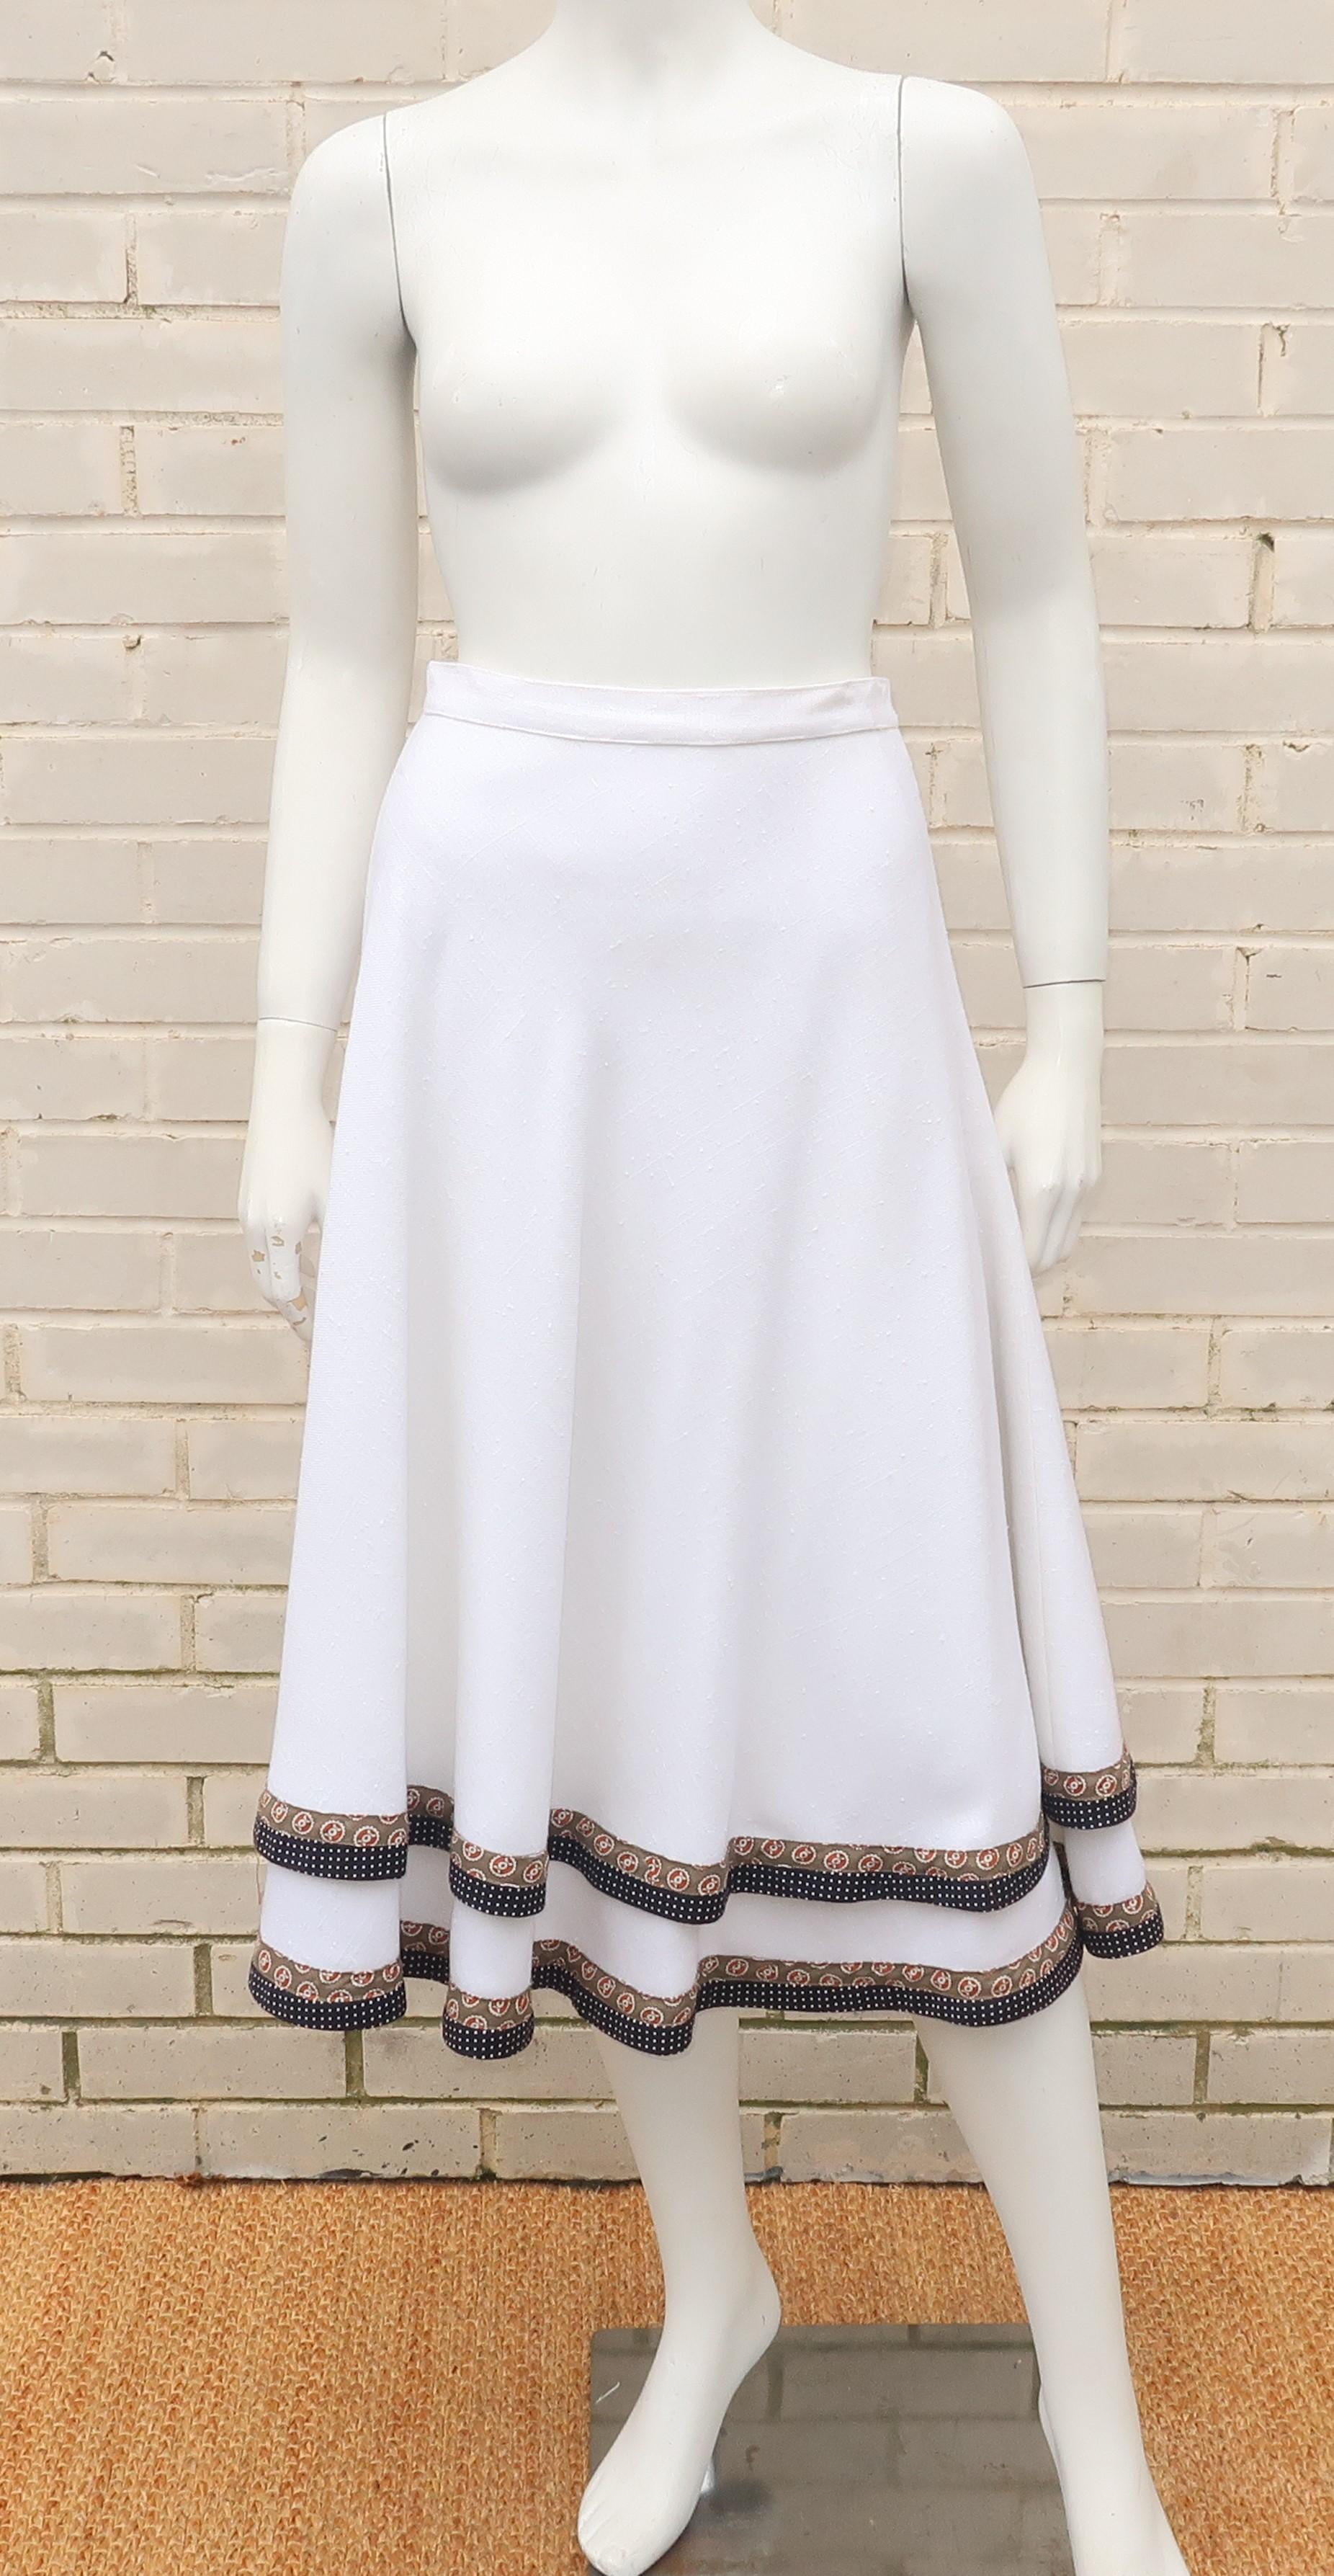 Dutch designer, Koos Van den Akker, became known in the 1970’s for his ‘collage’ clothing designs ... expertly mixing textiles for a great bohemian effect.  This two tiered skirt has a peasant style silhouette with a double layer of a heavy white